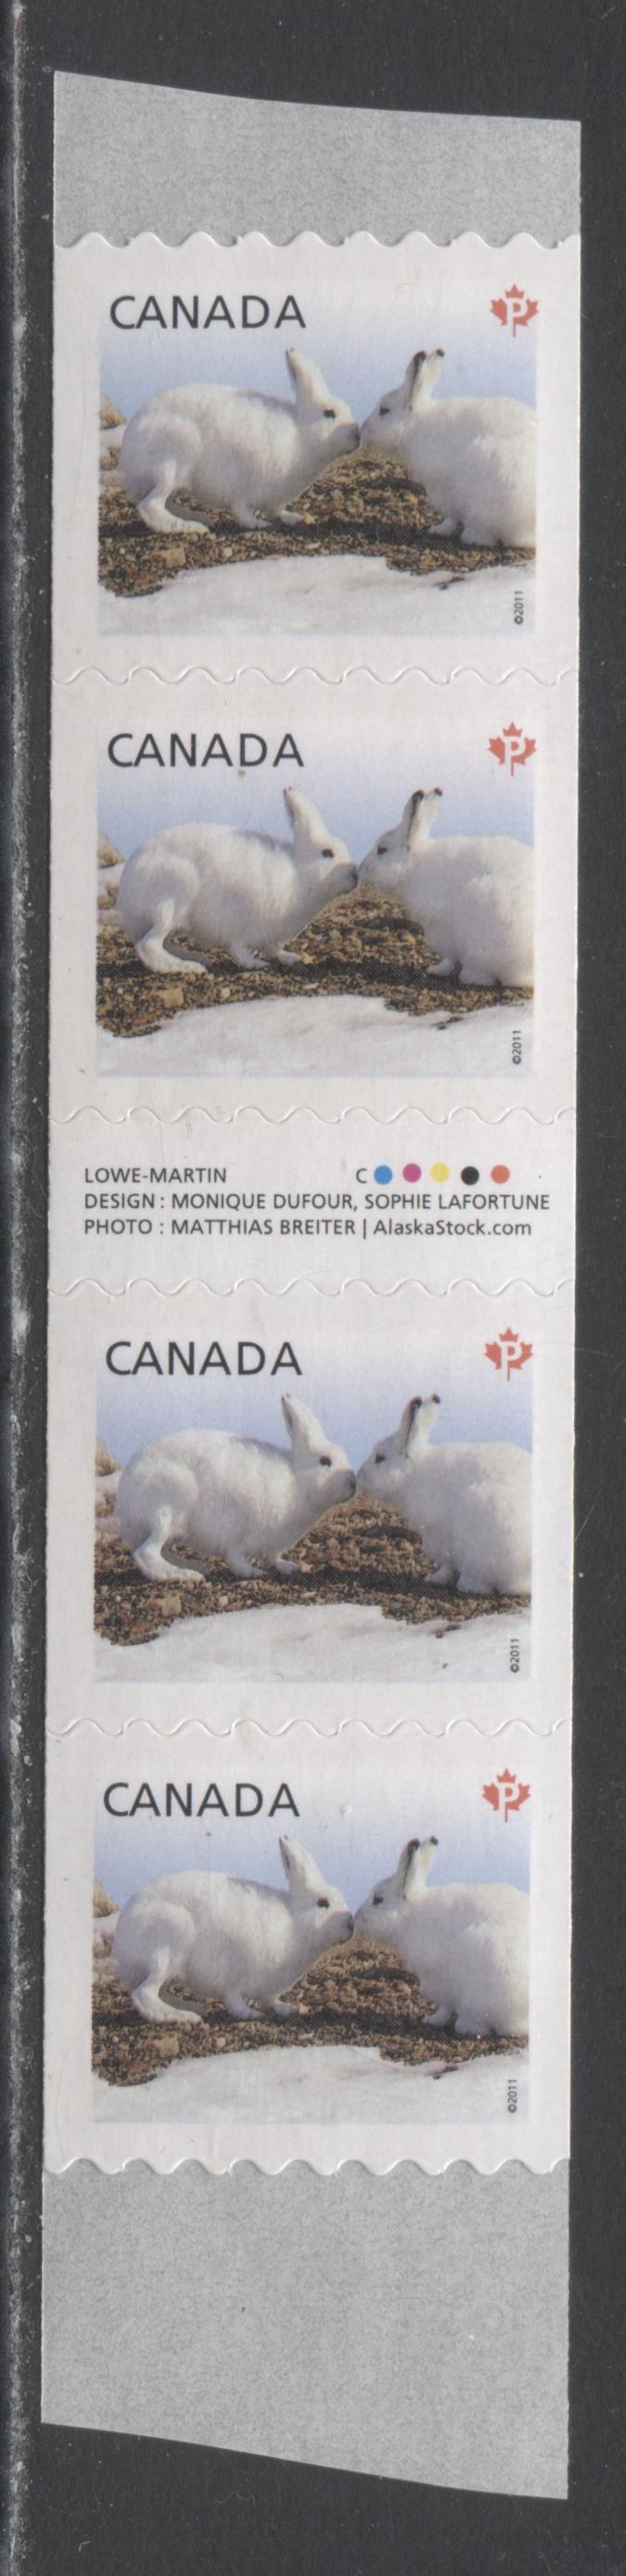 Lot 130 Canada #2426i P(59c) Multicolored Arctic Hare, 2011 Baby Wildlife Definitives, A VFNH Gutter Strip Of 4 With Inscription